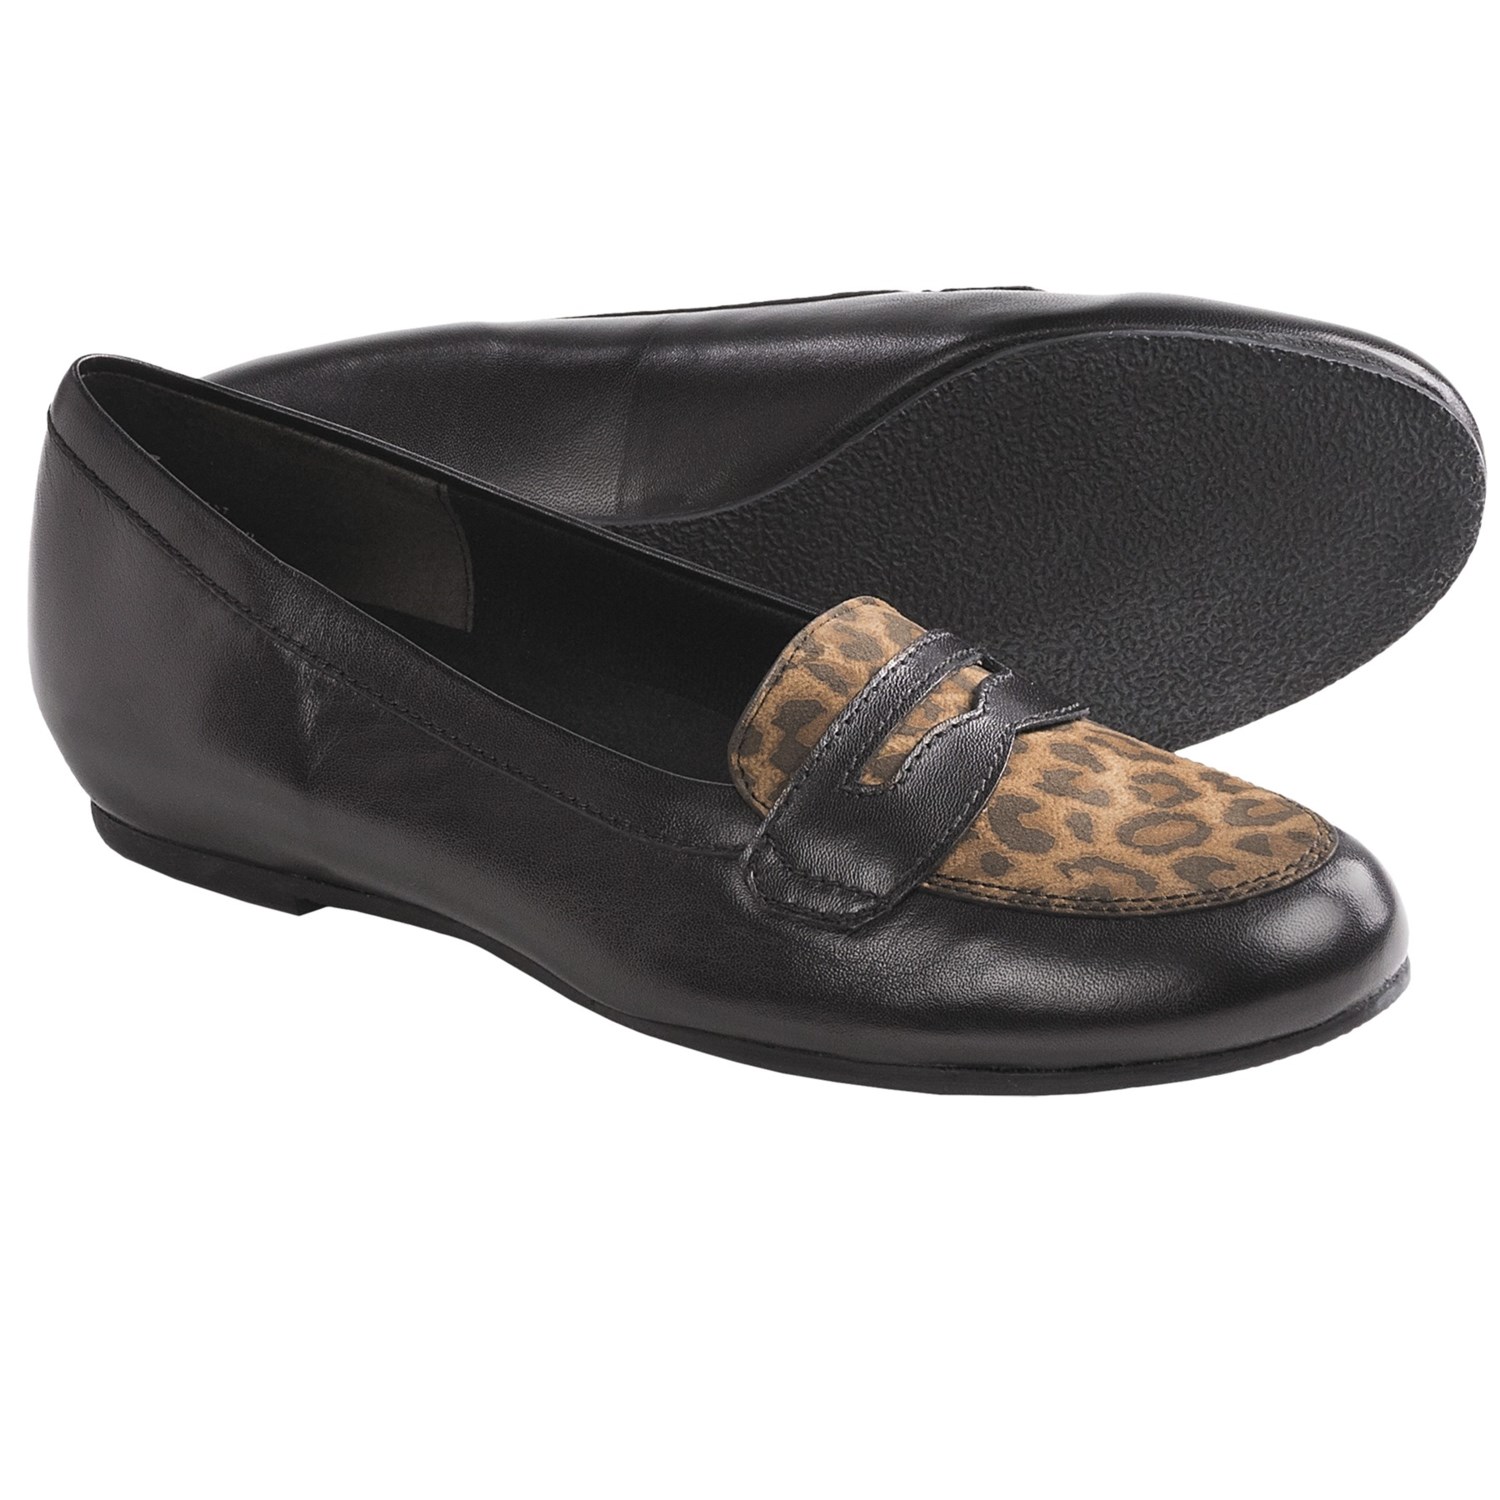  - munro-american-carrie-penny-loafer-shoes-for-women-in-black-kid-leopard~p~6071r_01~1500.2